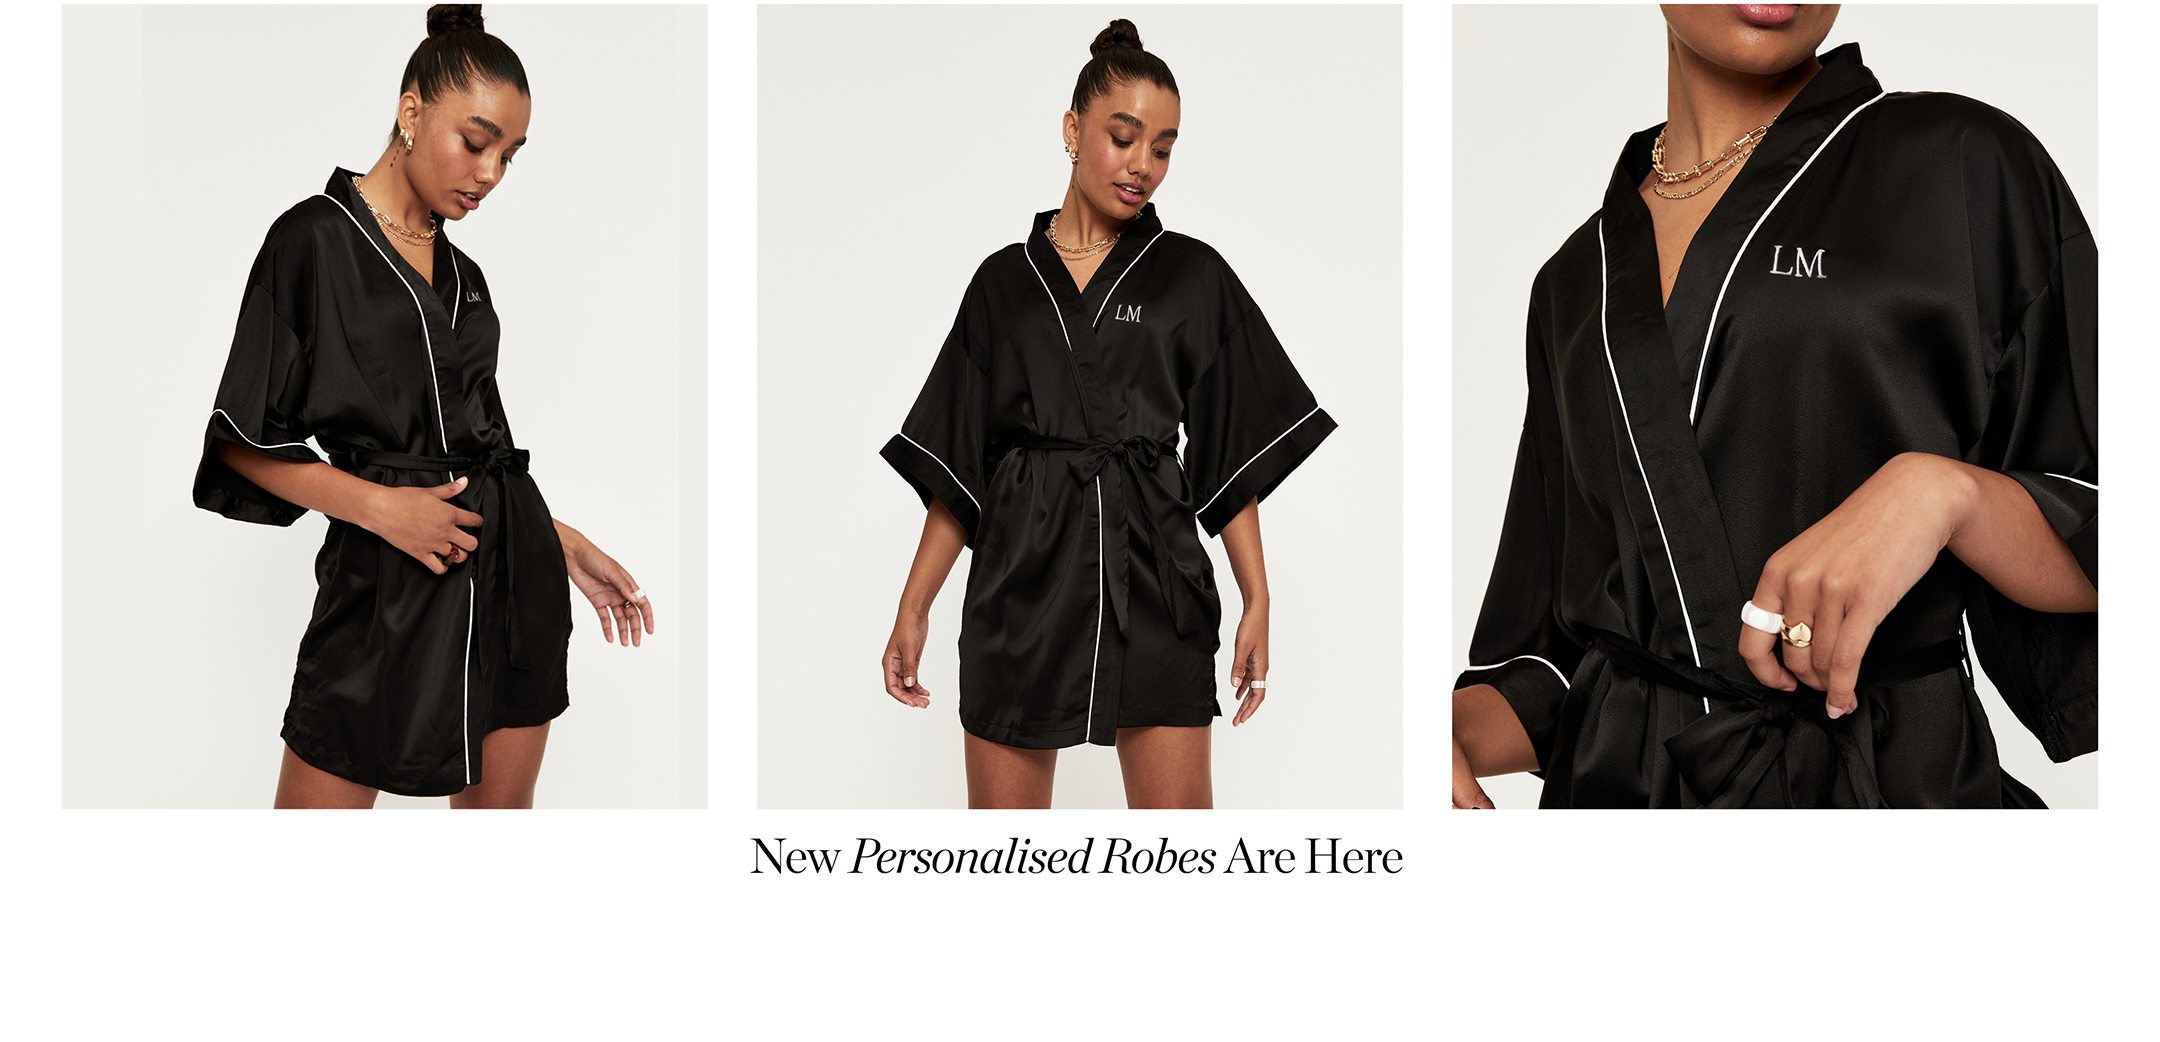 Personalised Robes Now Available! 